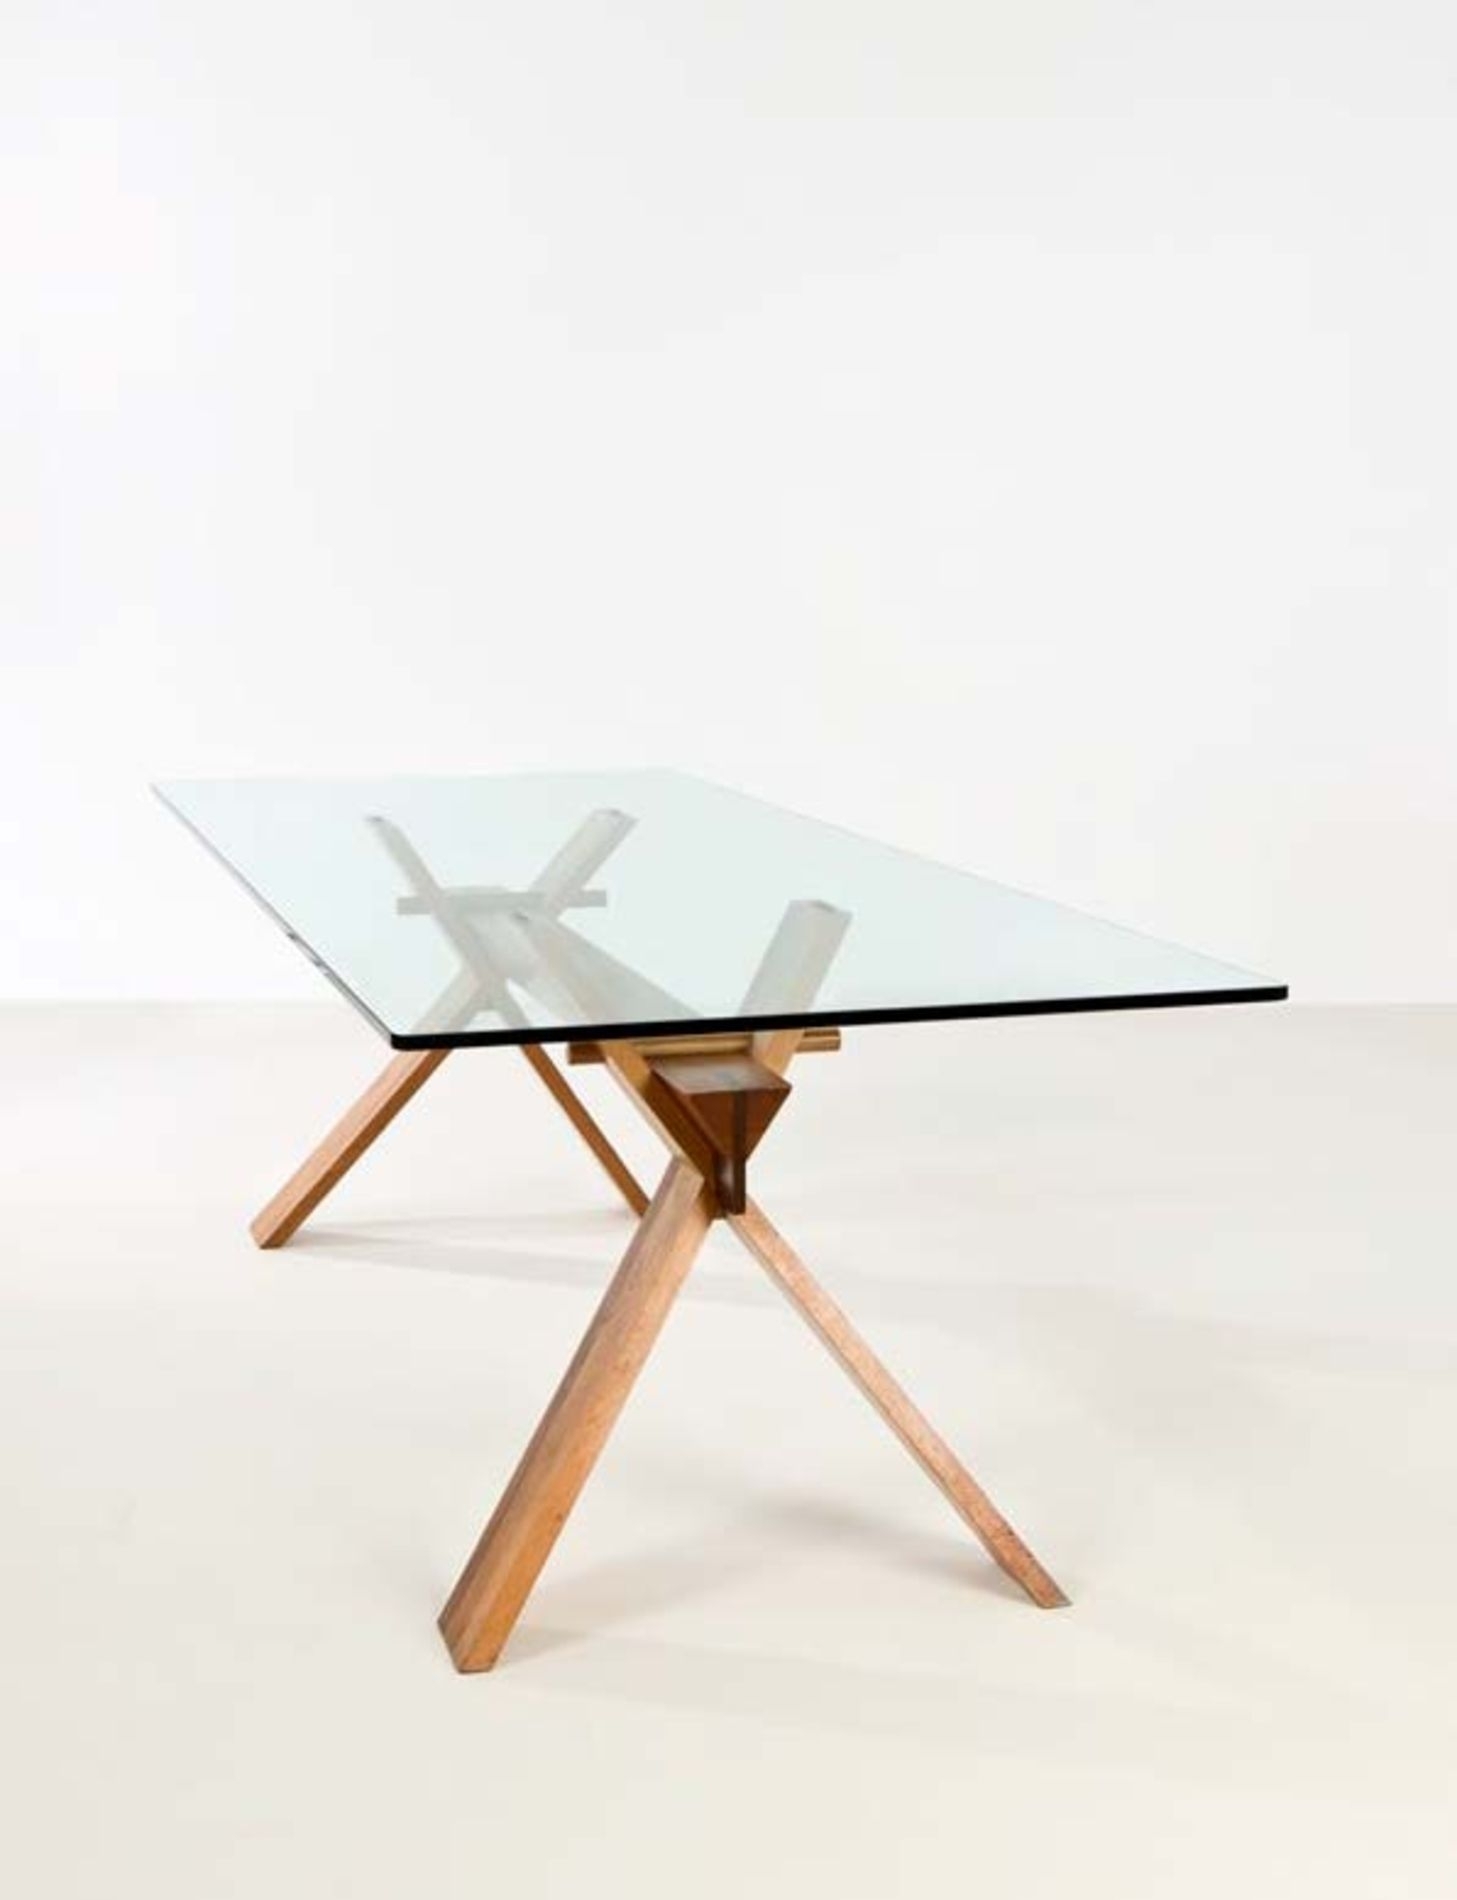 Wood Glass Dining Table Ideas On Foter